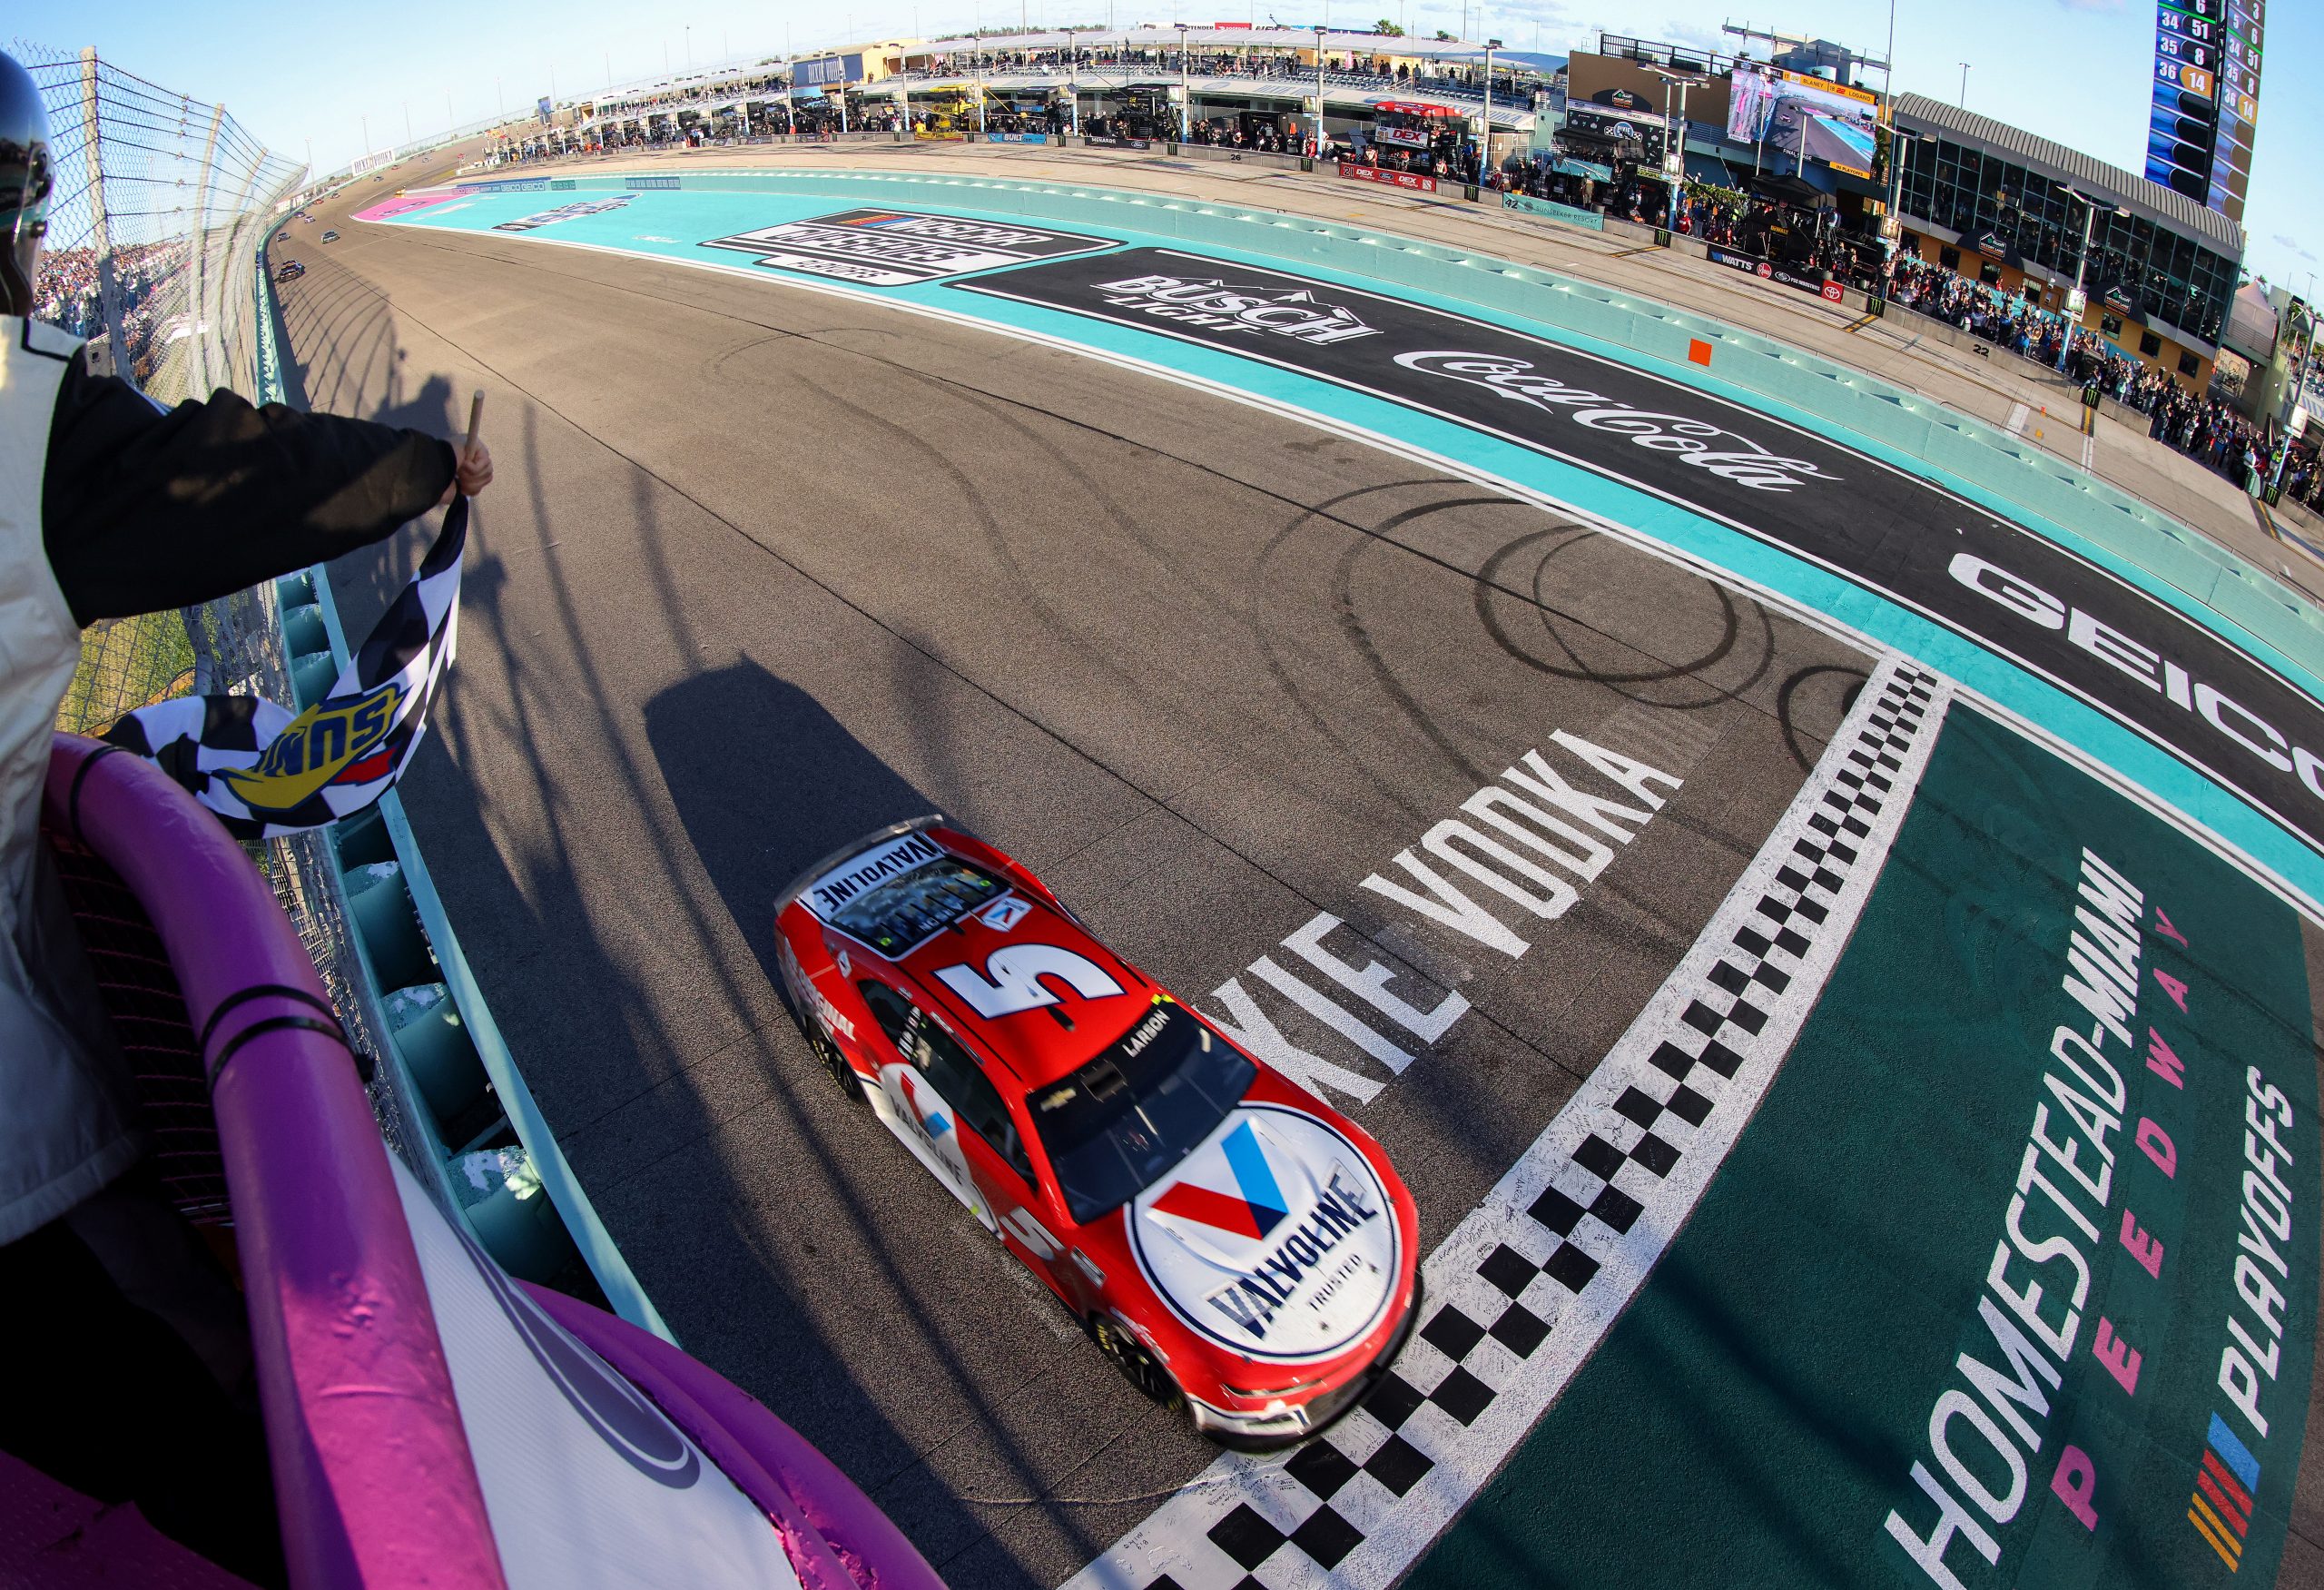 The familiar No. 5 Valvoline Chevy Camaro returned to Victory Lane. (Photo: Jared East | Getty Images)